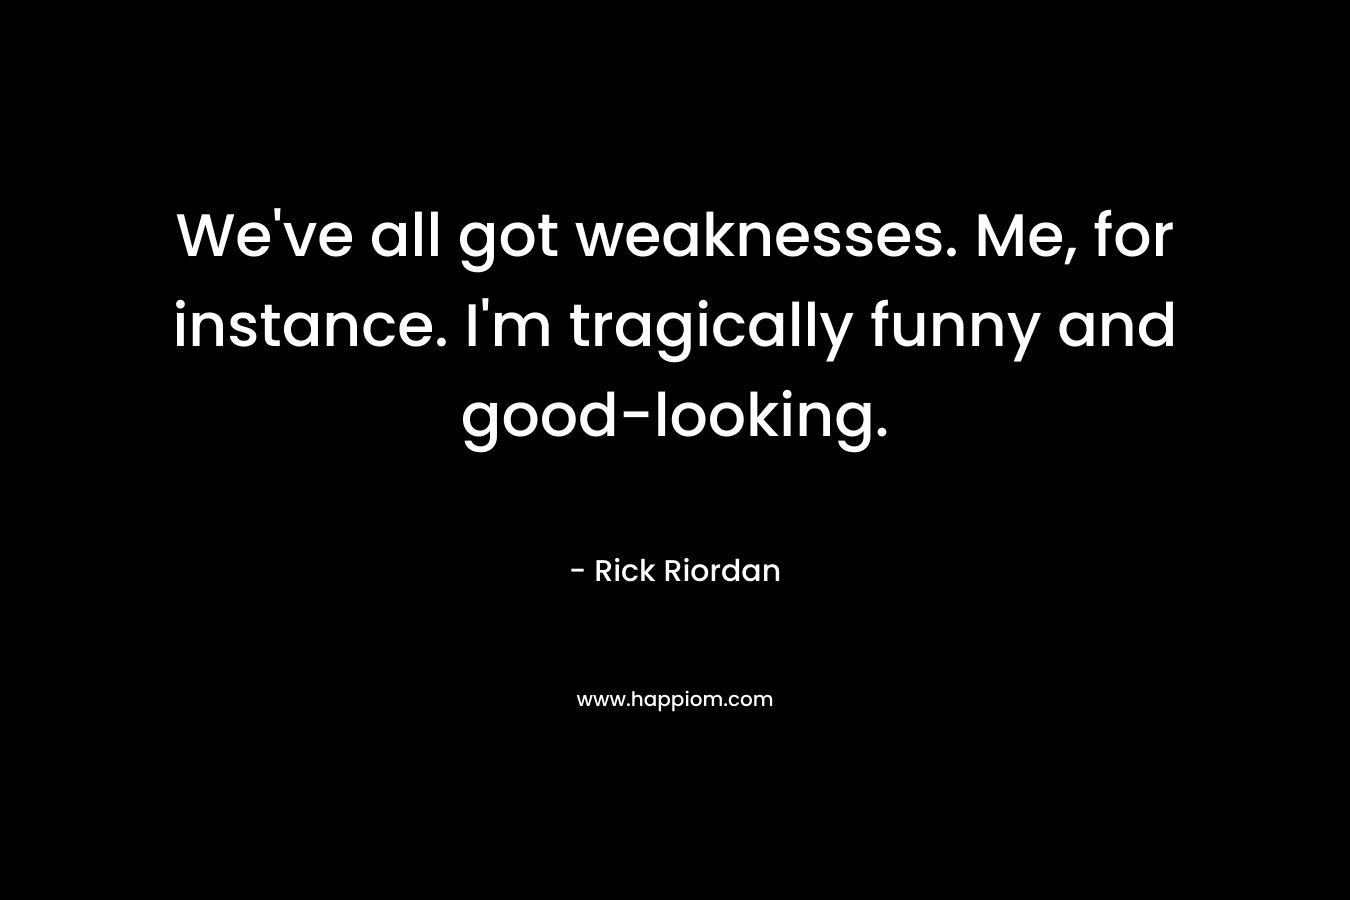 We’ve all got weaknesses. Me, for instance. I’m tragically funny and good-looking. – Rick Riordan